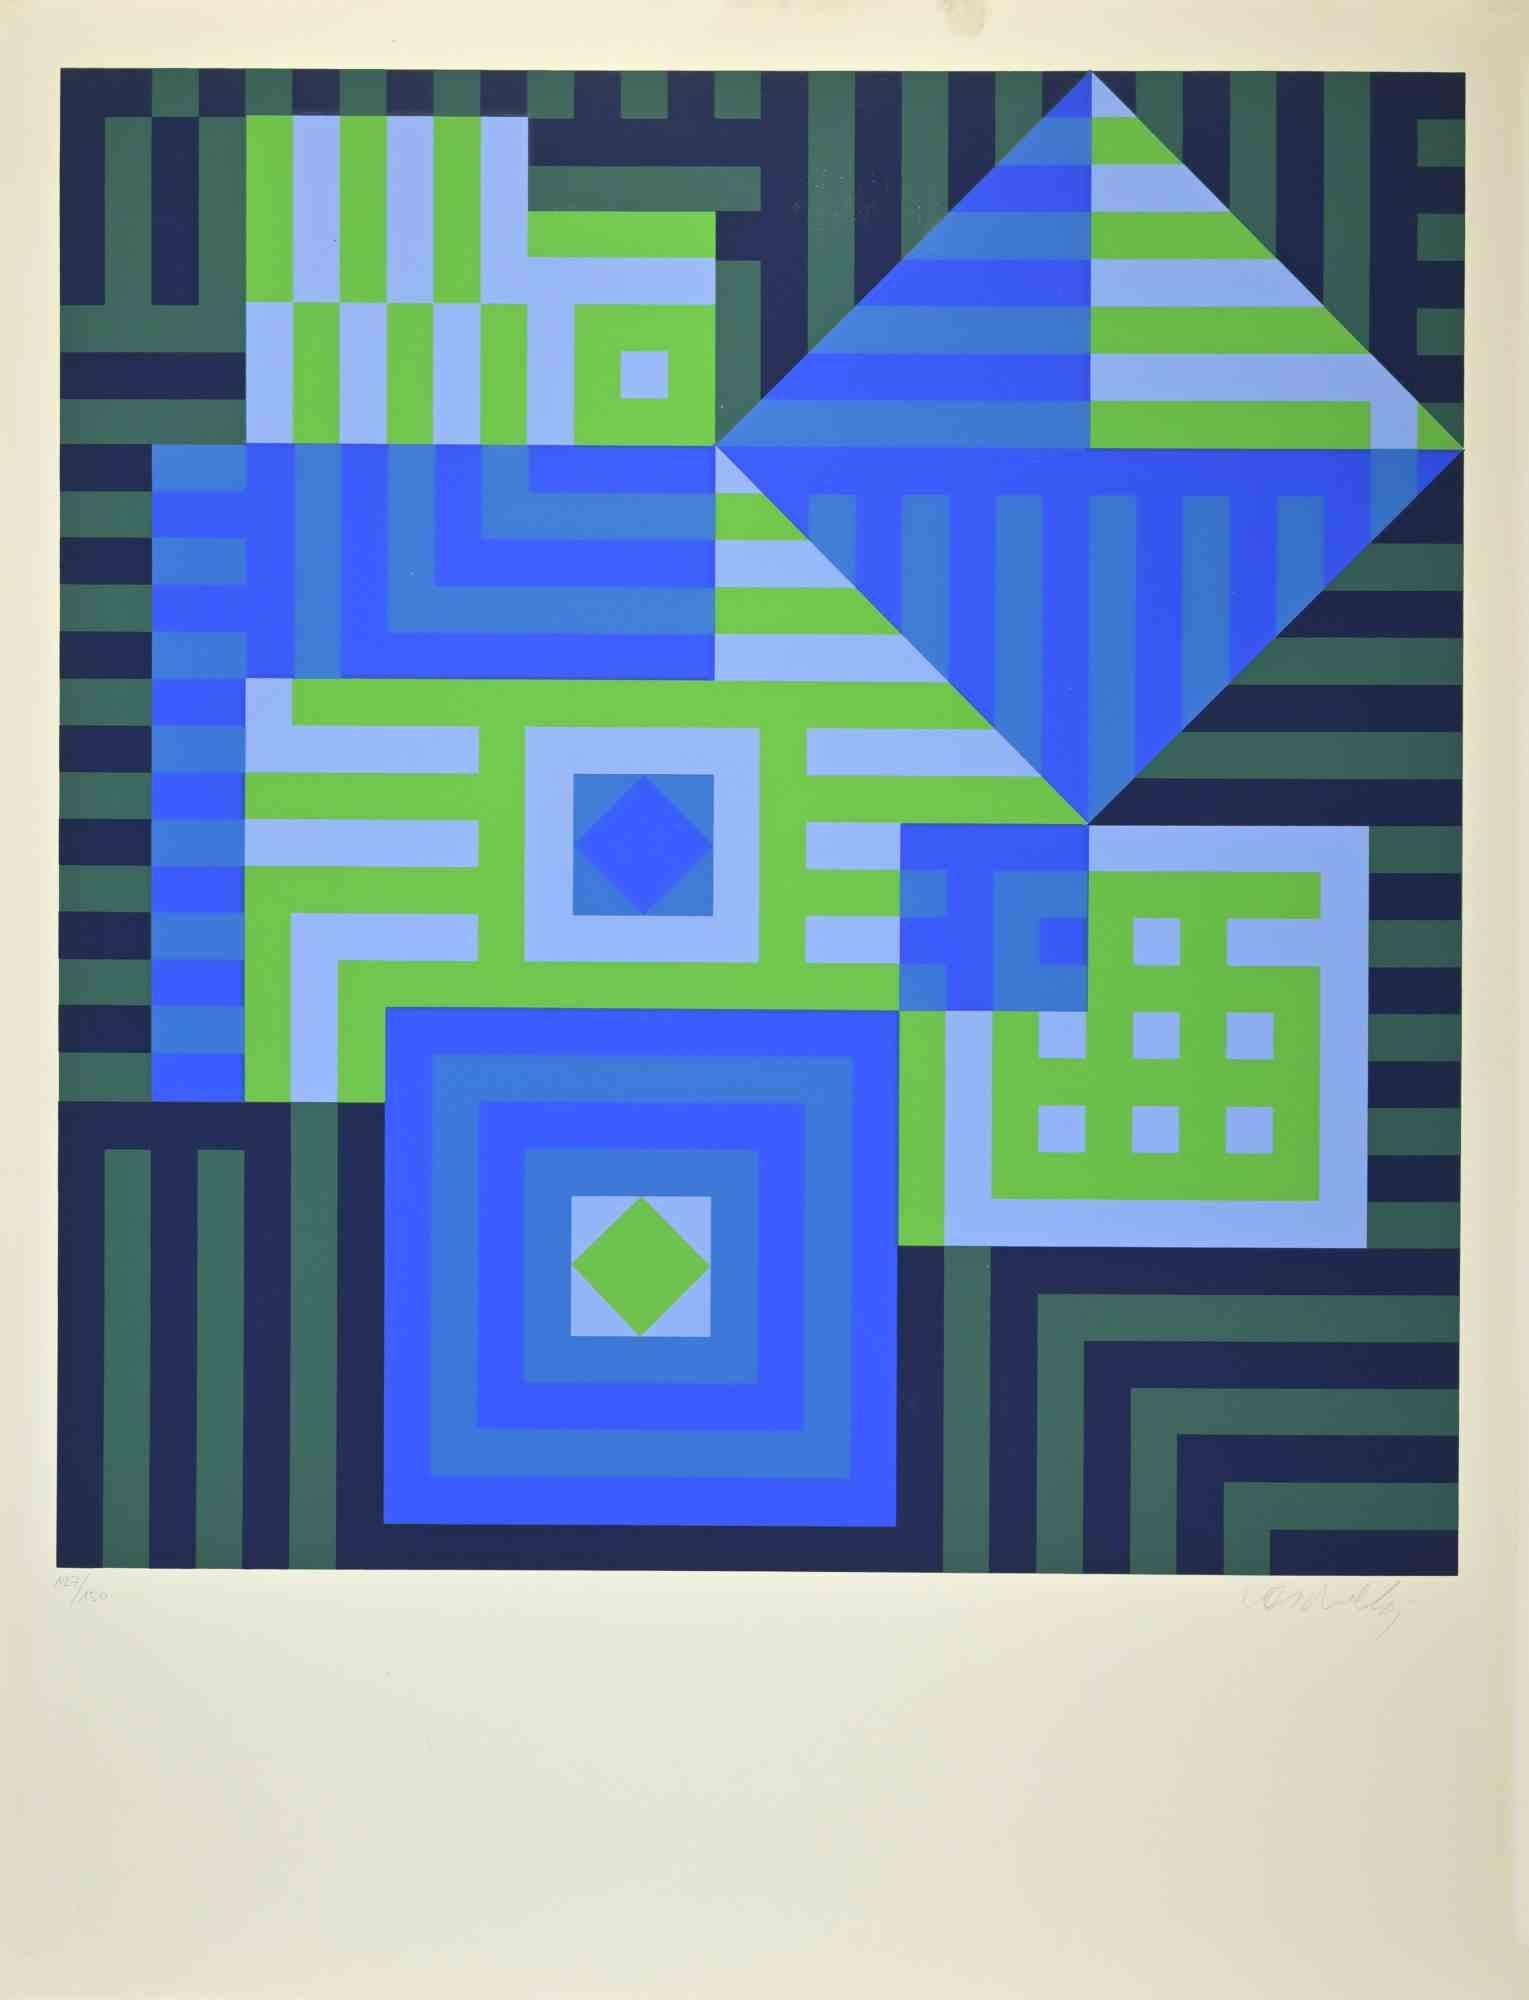 Abstract Print Victor Vasarely - Composition abstraite - Sérigraphie de V. Vasarely - années 1980